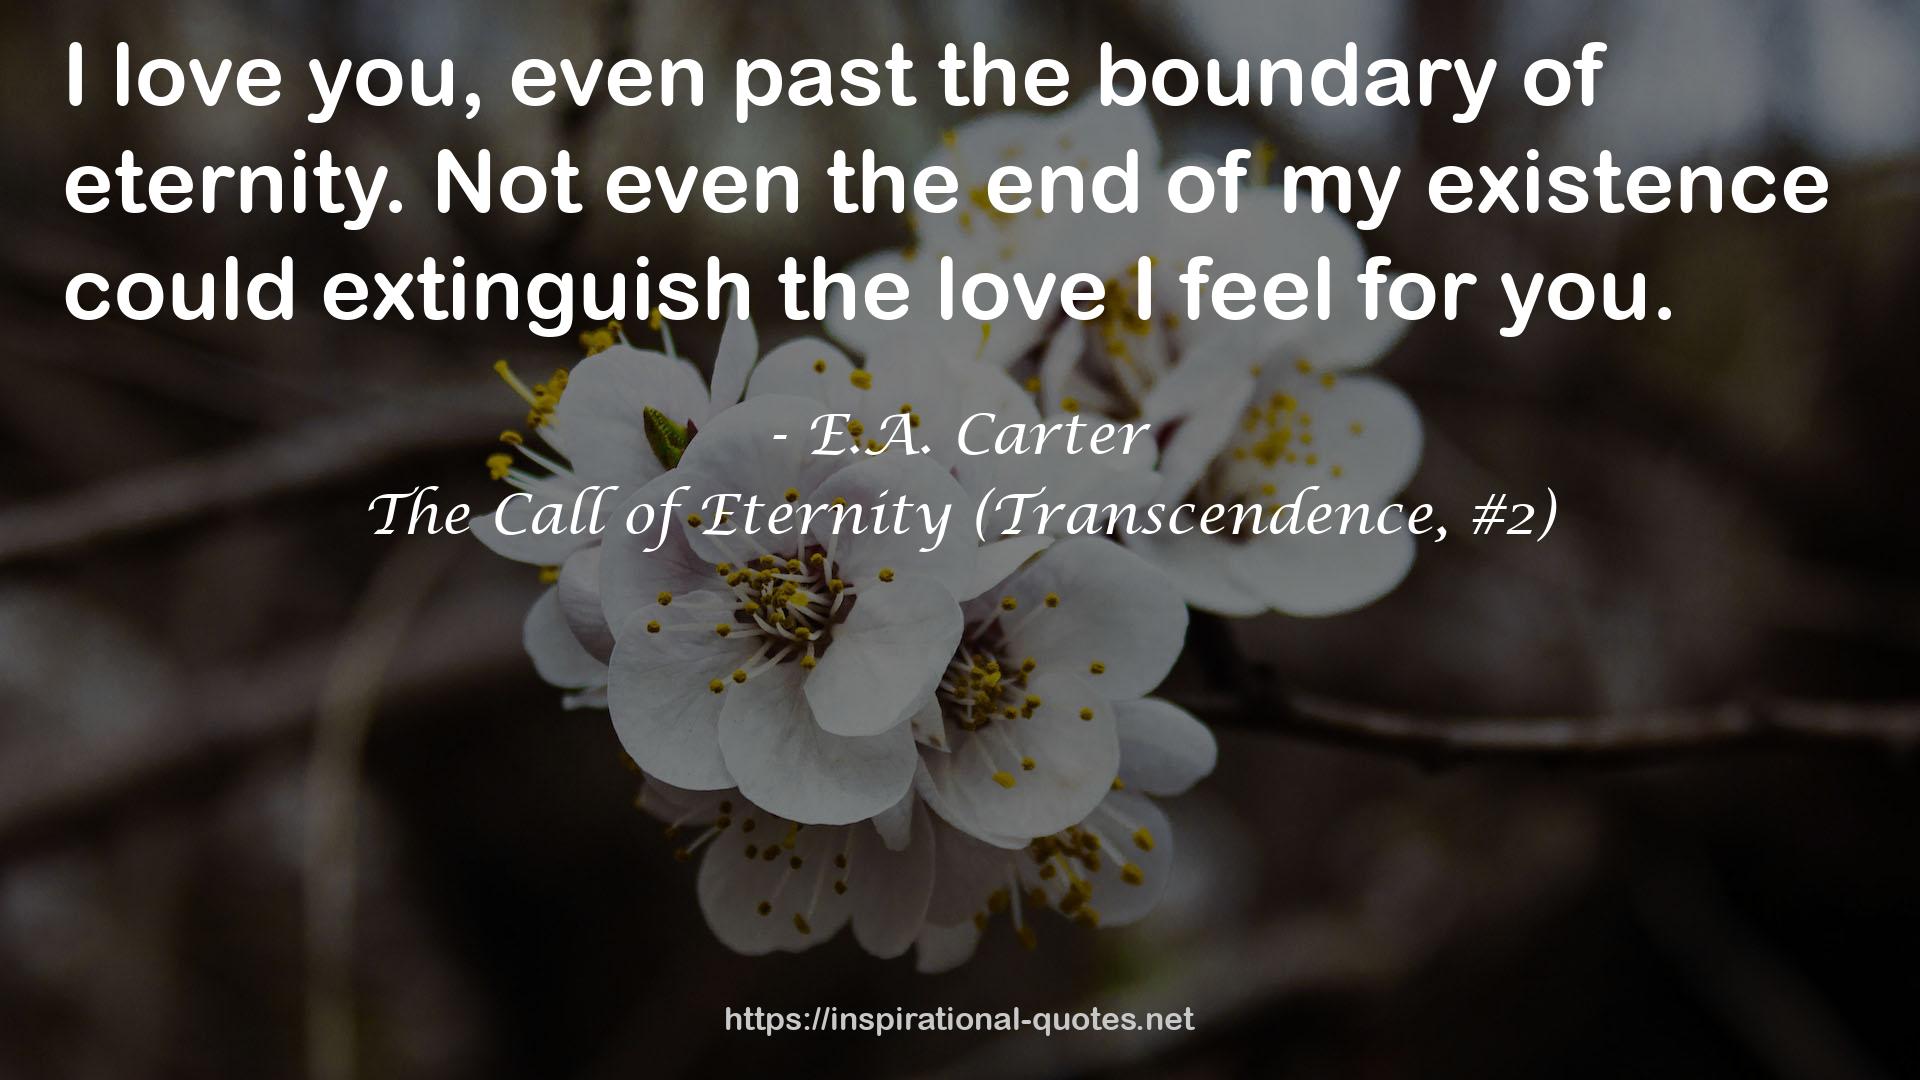 The Call of Eternity (Transcendence, #2) QUOTES